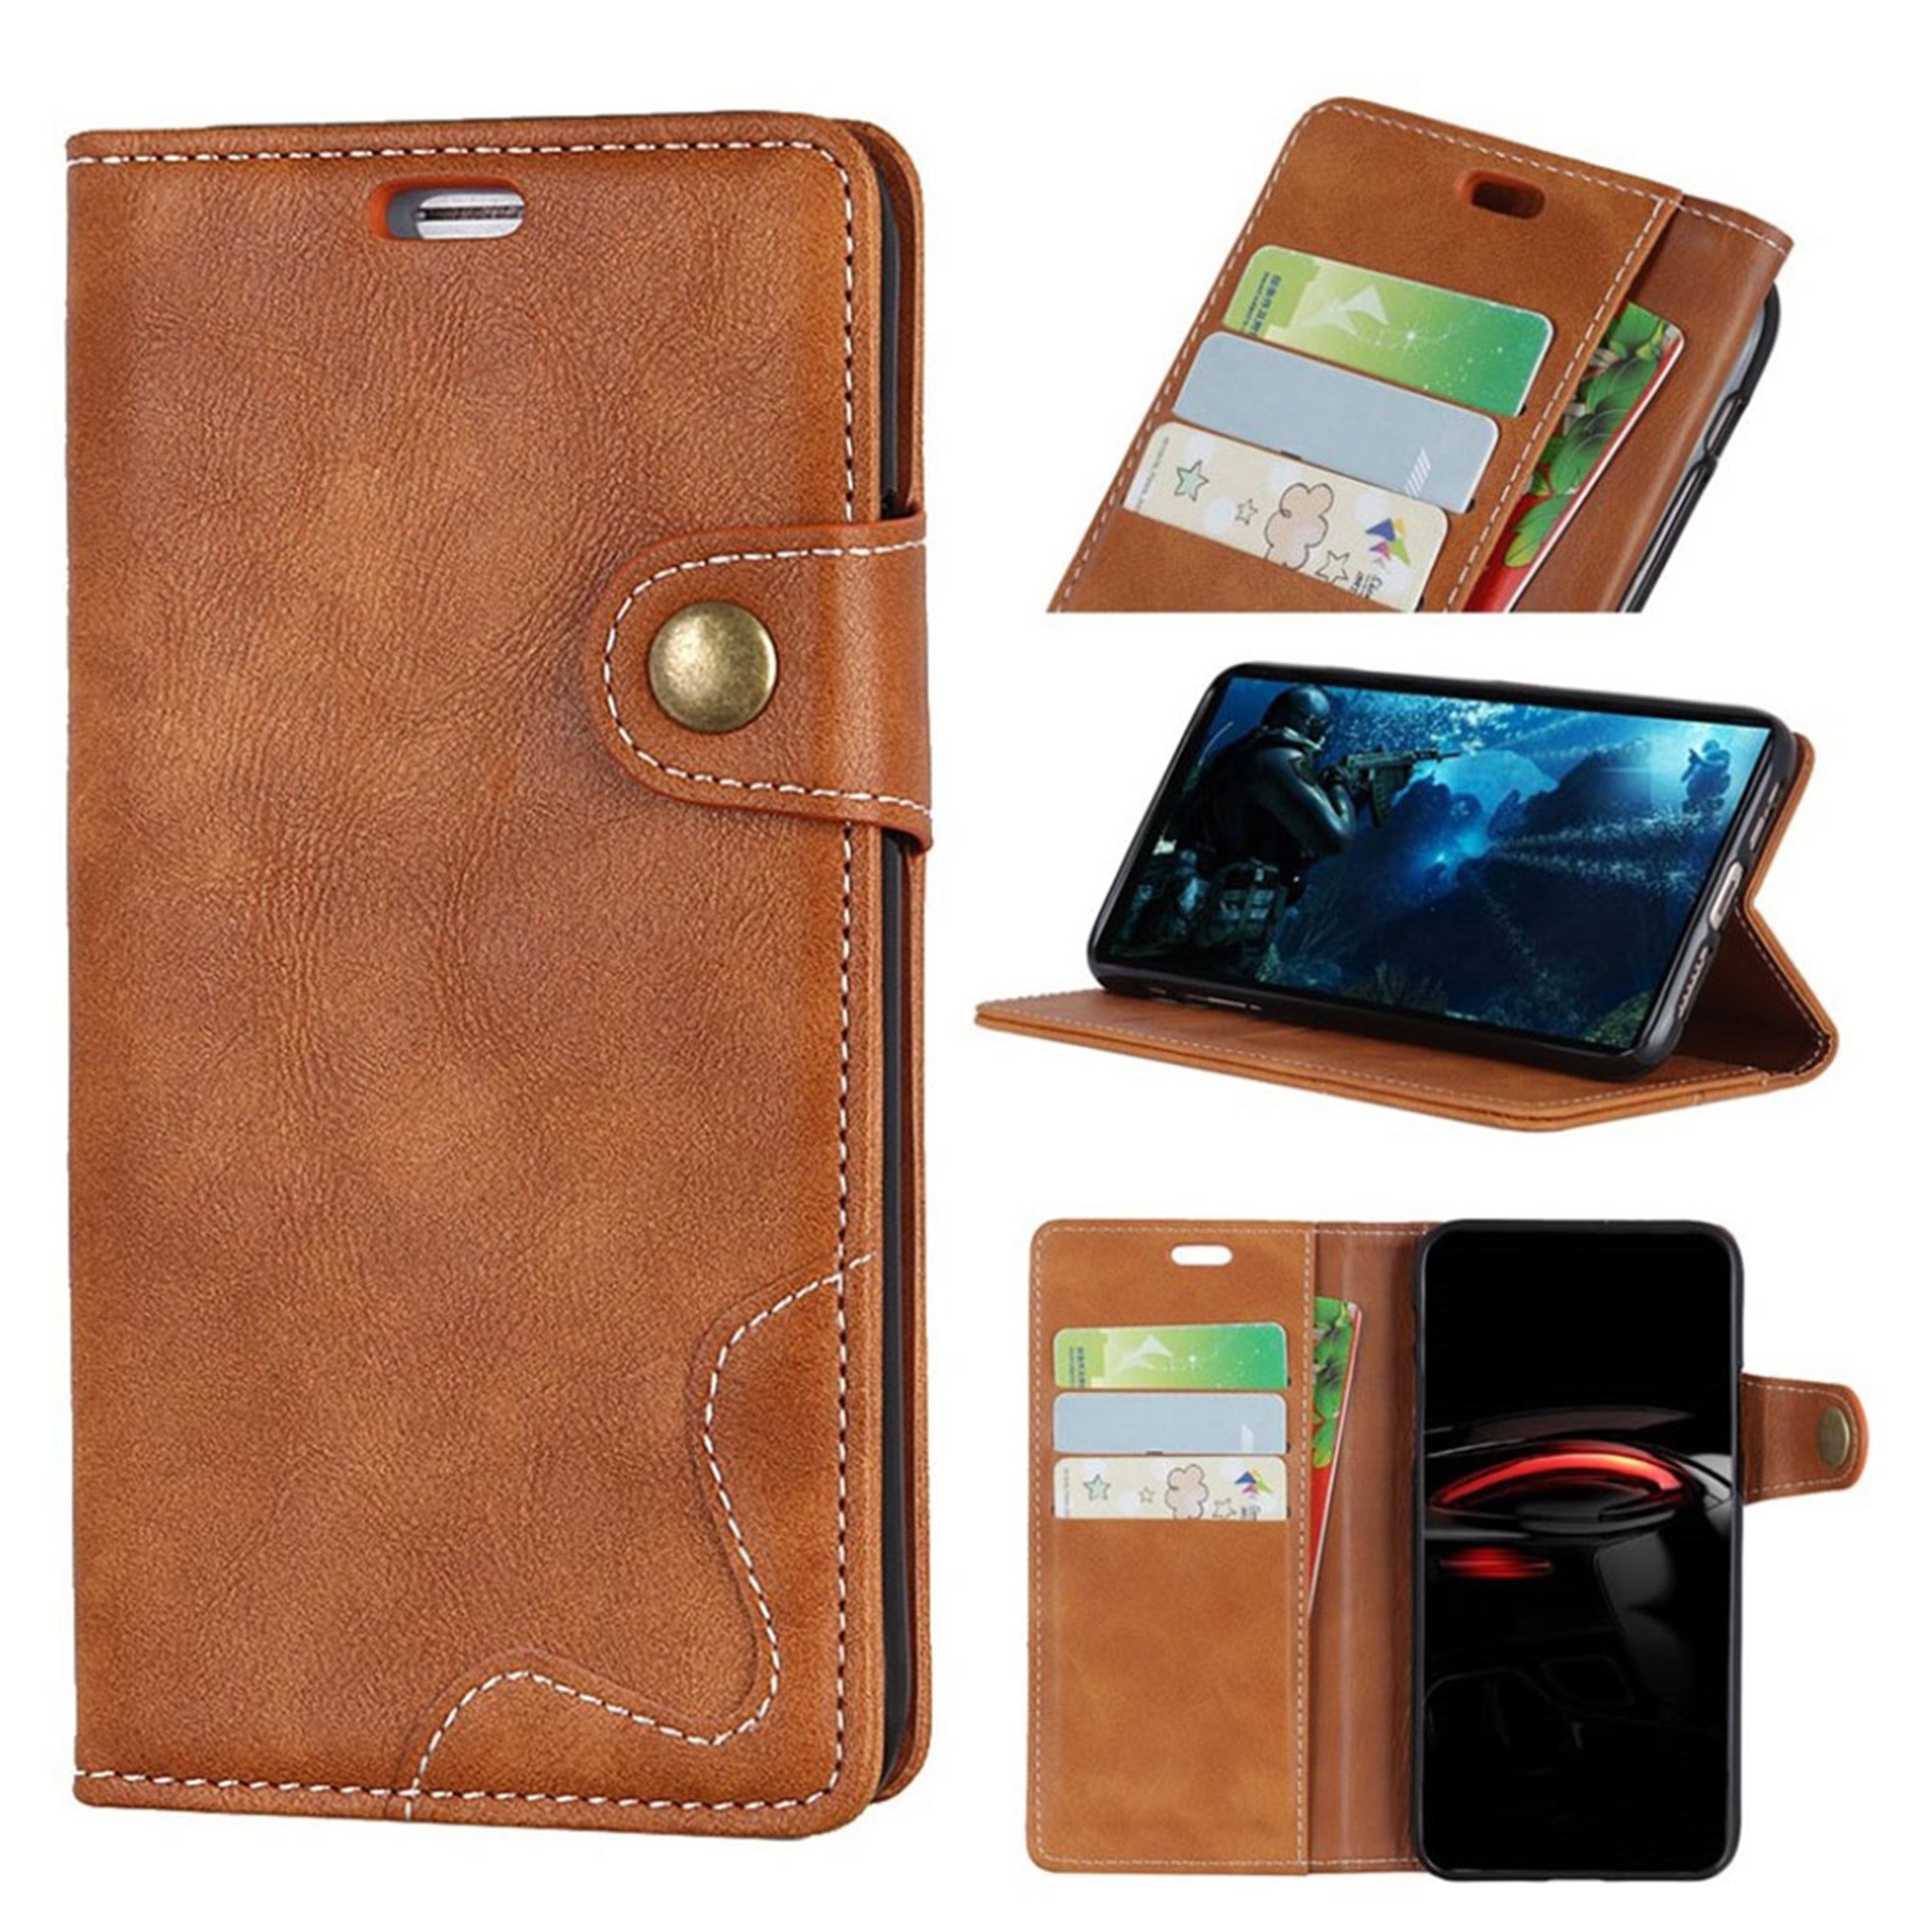 iPhone Xs Max S-shape texture leather flip case - Brown